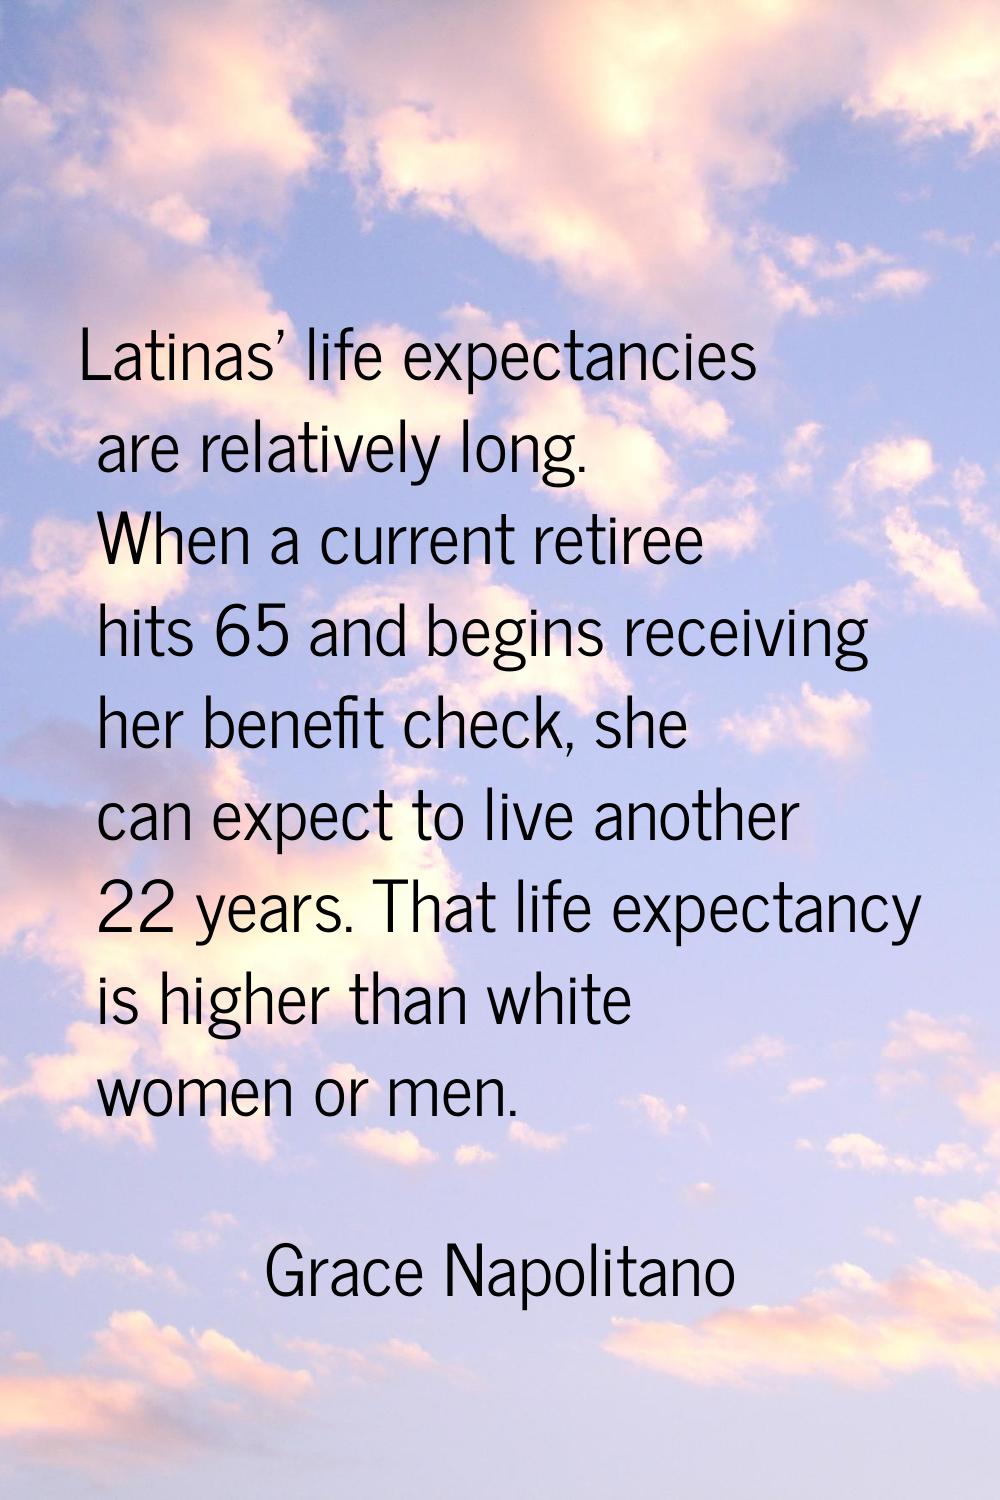 Latinas' life expectancies are relatively long. When a current retiree hits 65 and begins receiving